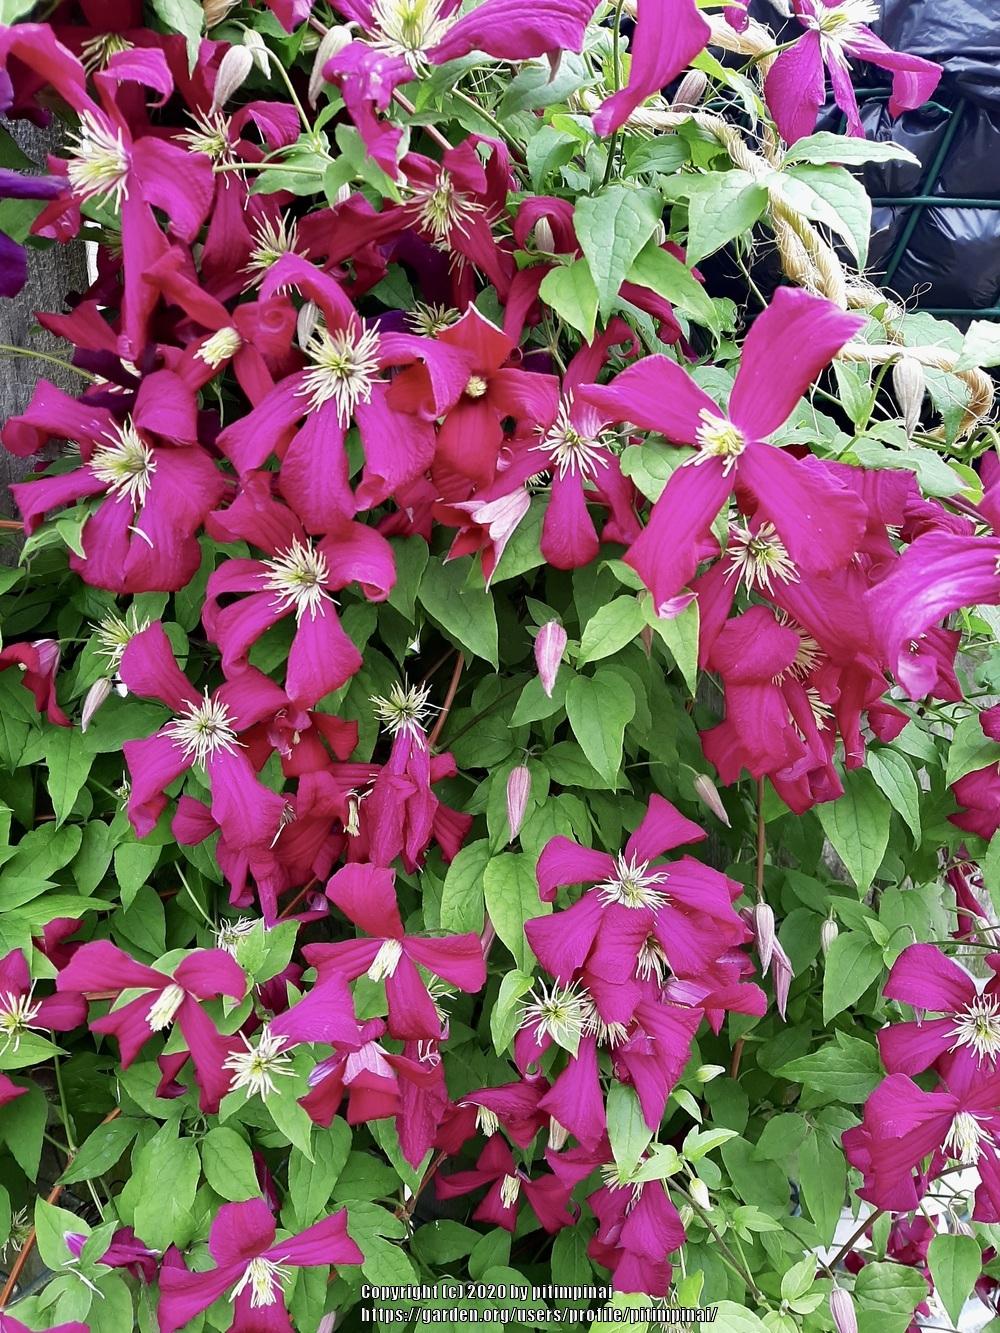 Photo of Clematis (Clematis viticella 'Madame Julia Correvon') uploaded by pitimpinai